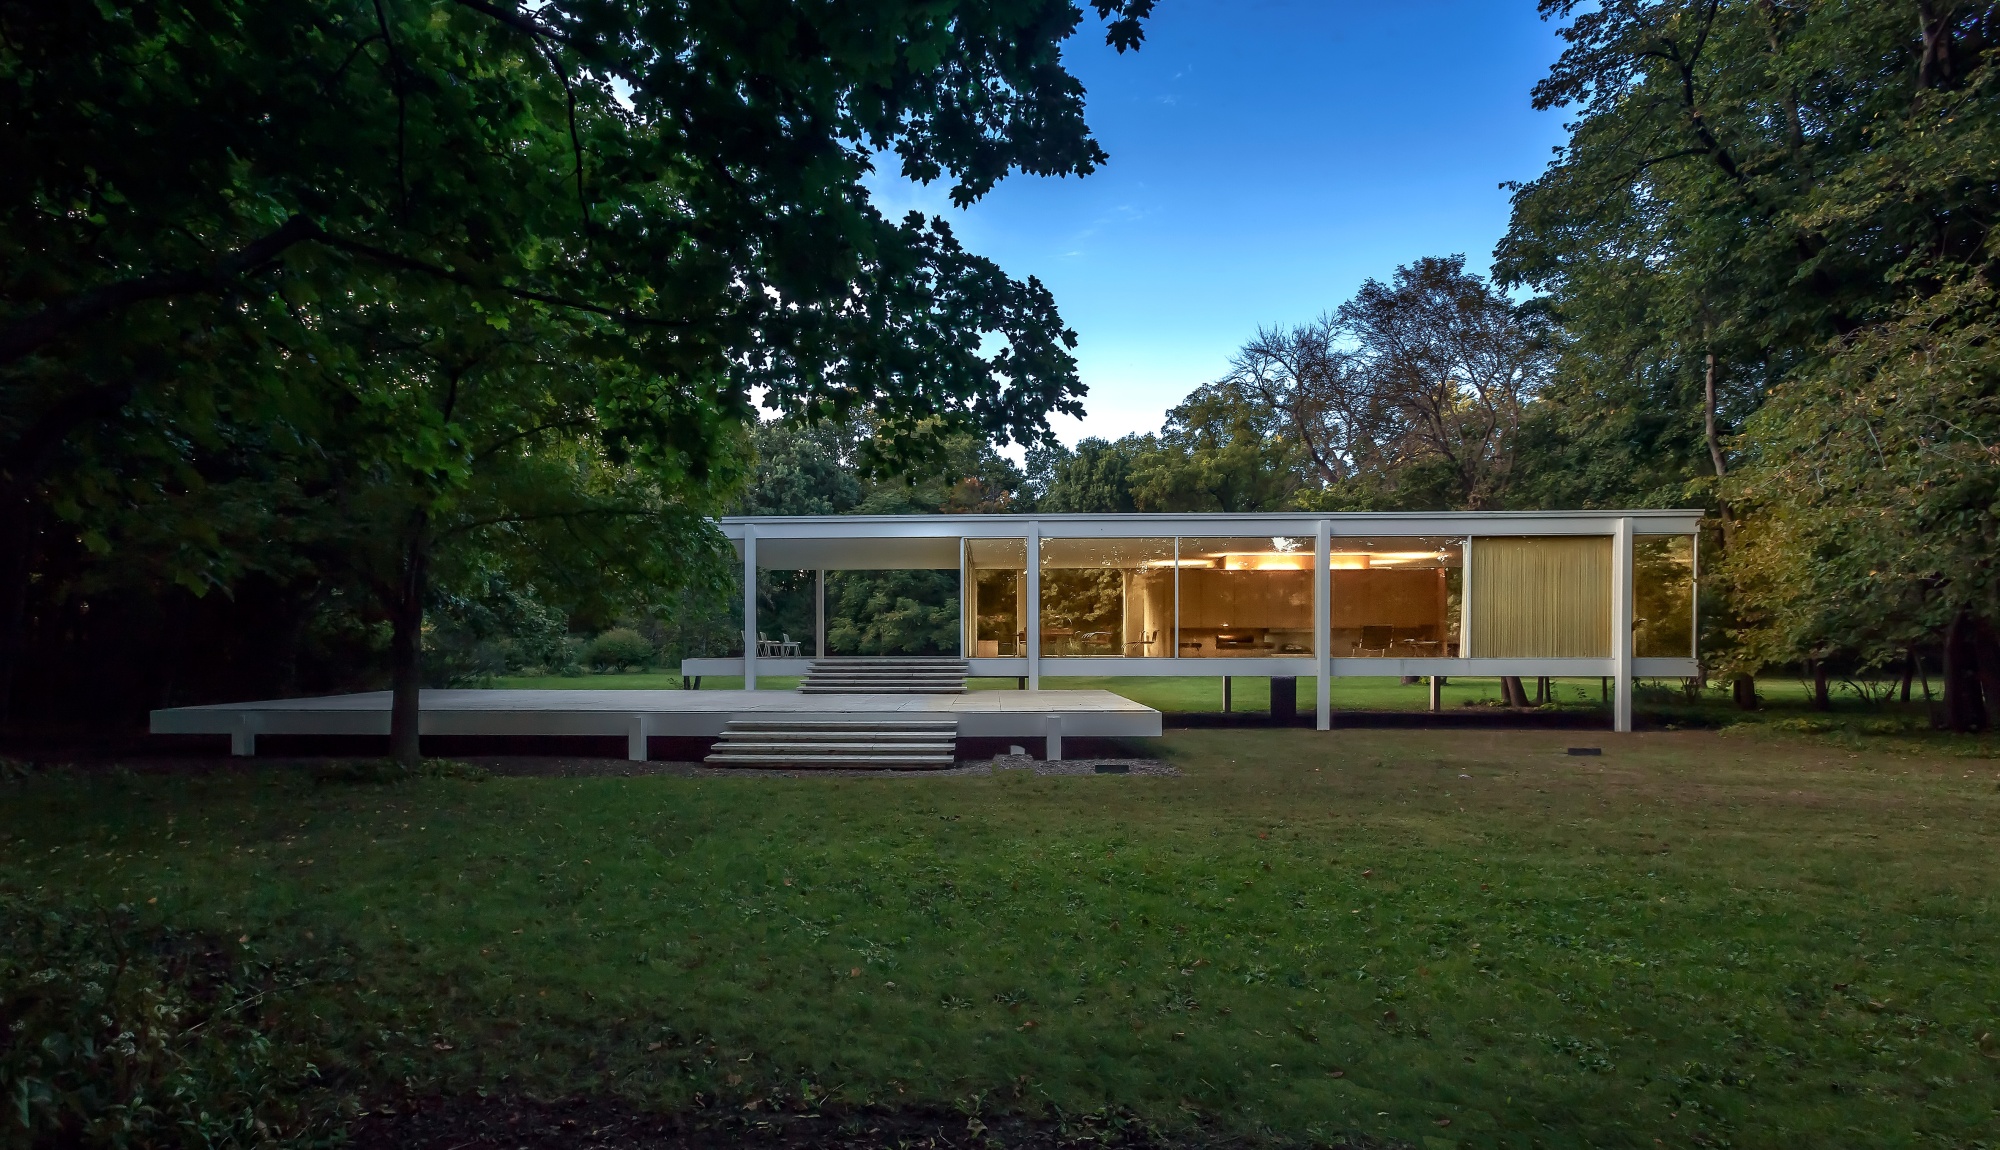 Built in 1951 and renamed 70 years later: the Edith Farnsworth House.&nbsp;